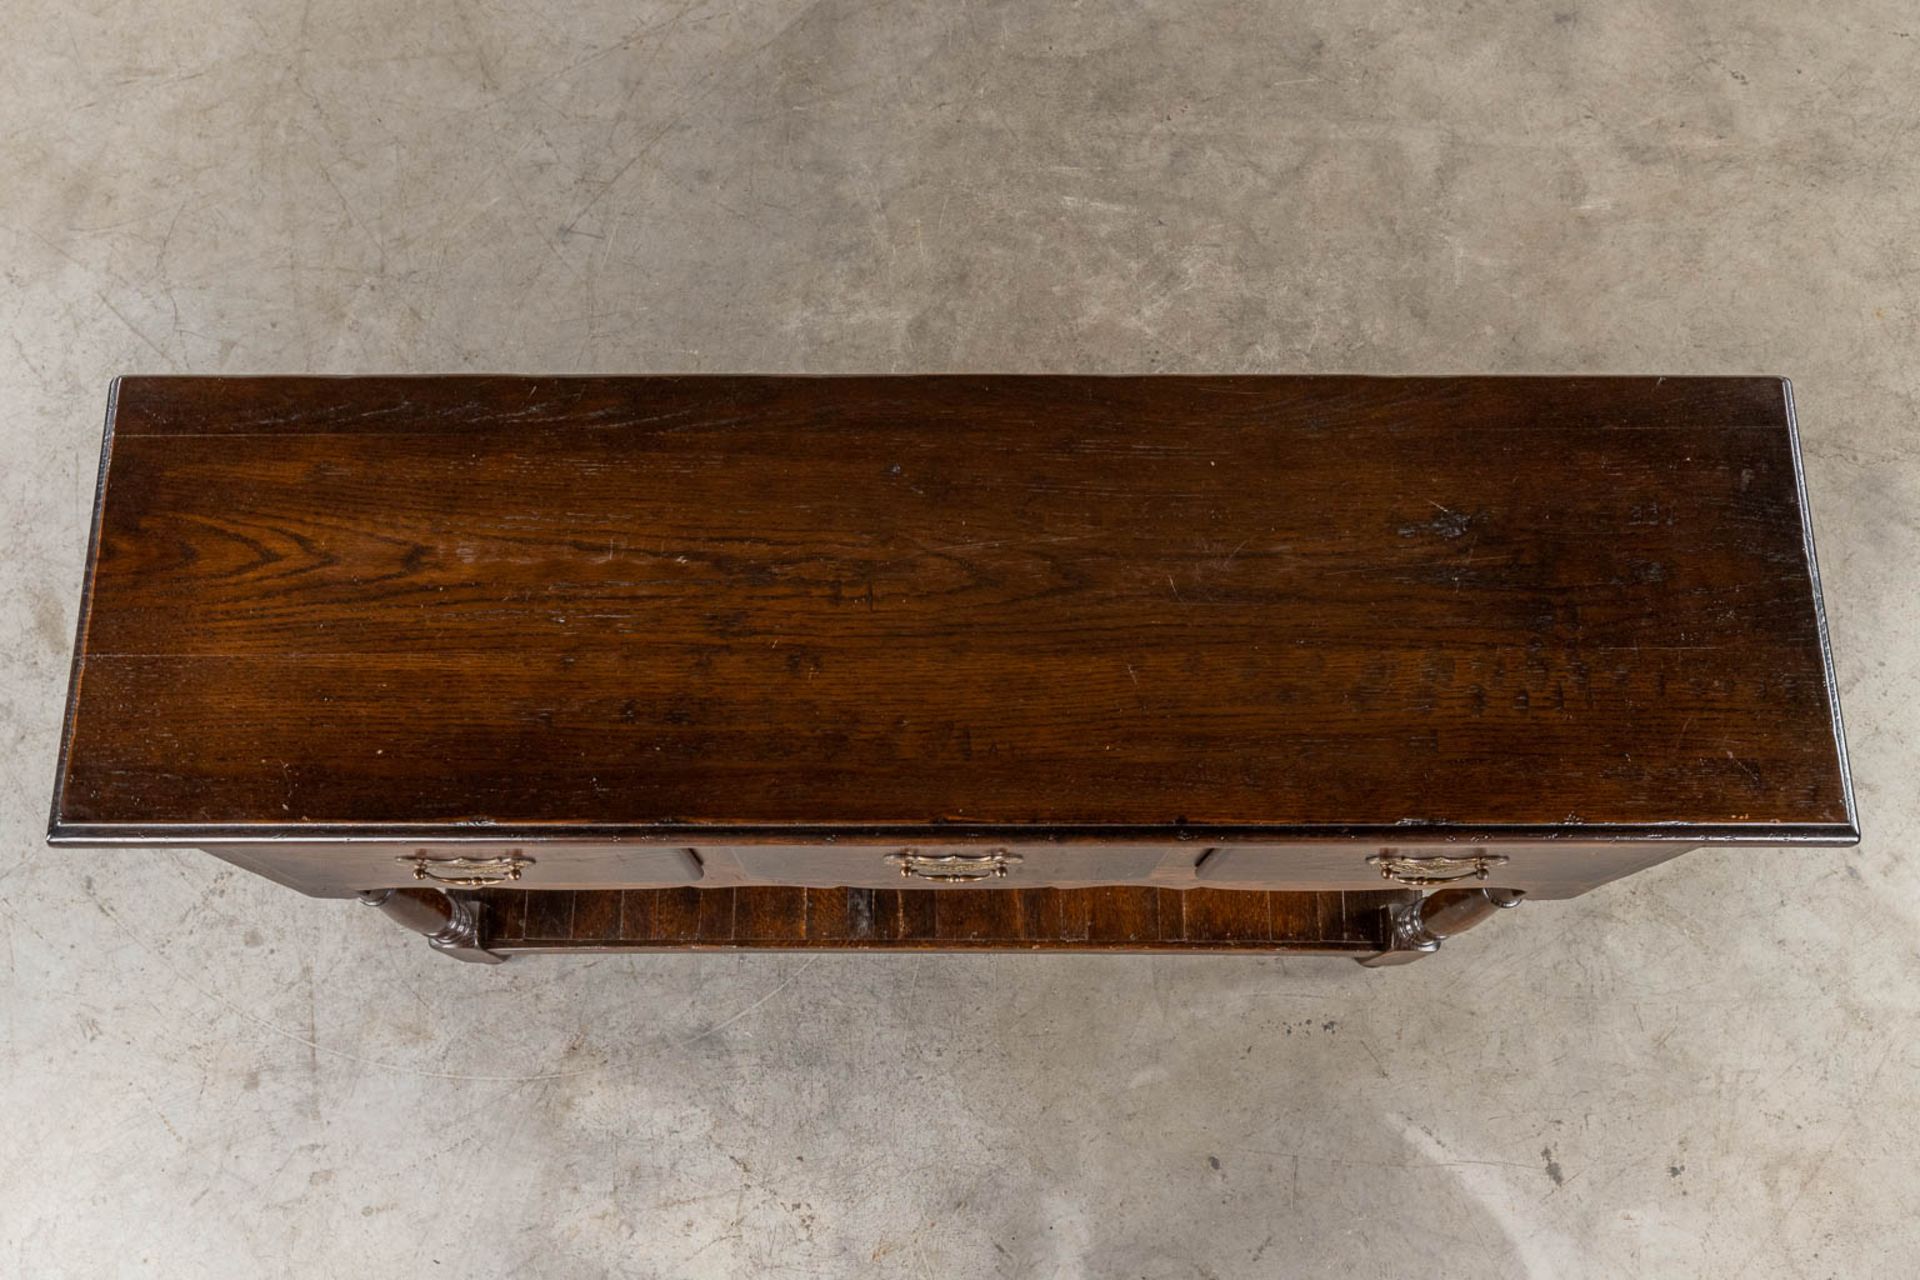 An English console table with 3 drawers. 20th C. (D:35 x W:120 x H:77 cm) - Image 8 of 8